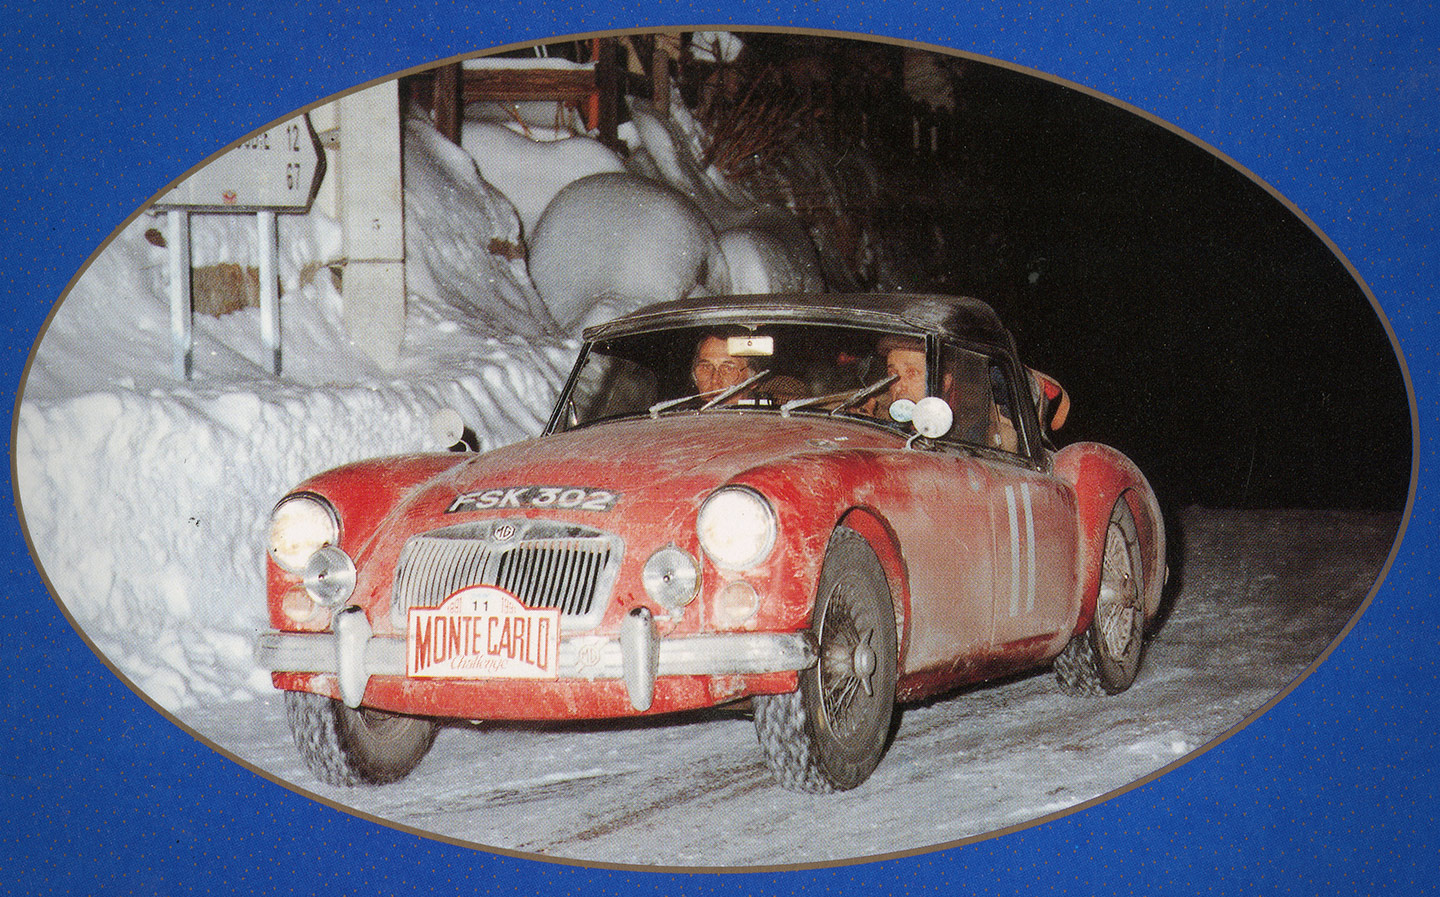 Ron Gammons driving Greenaway's MGA to victory on the Monte Carlo Challenge.